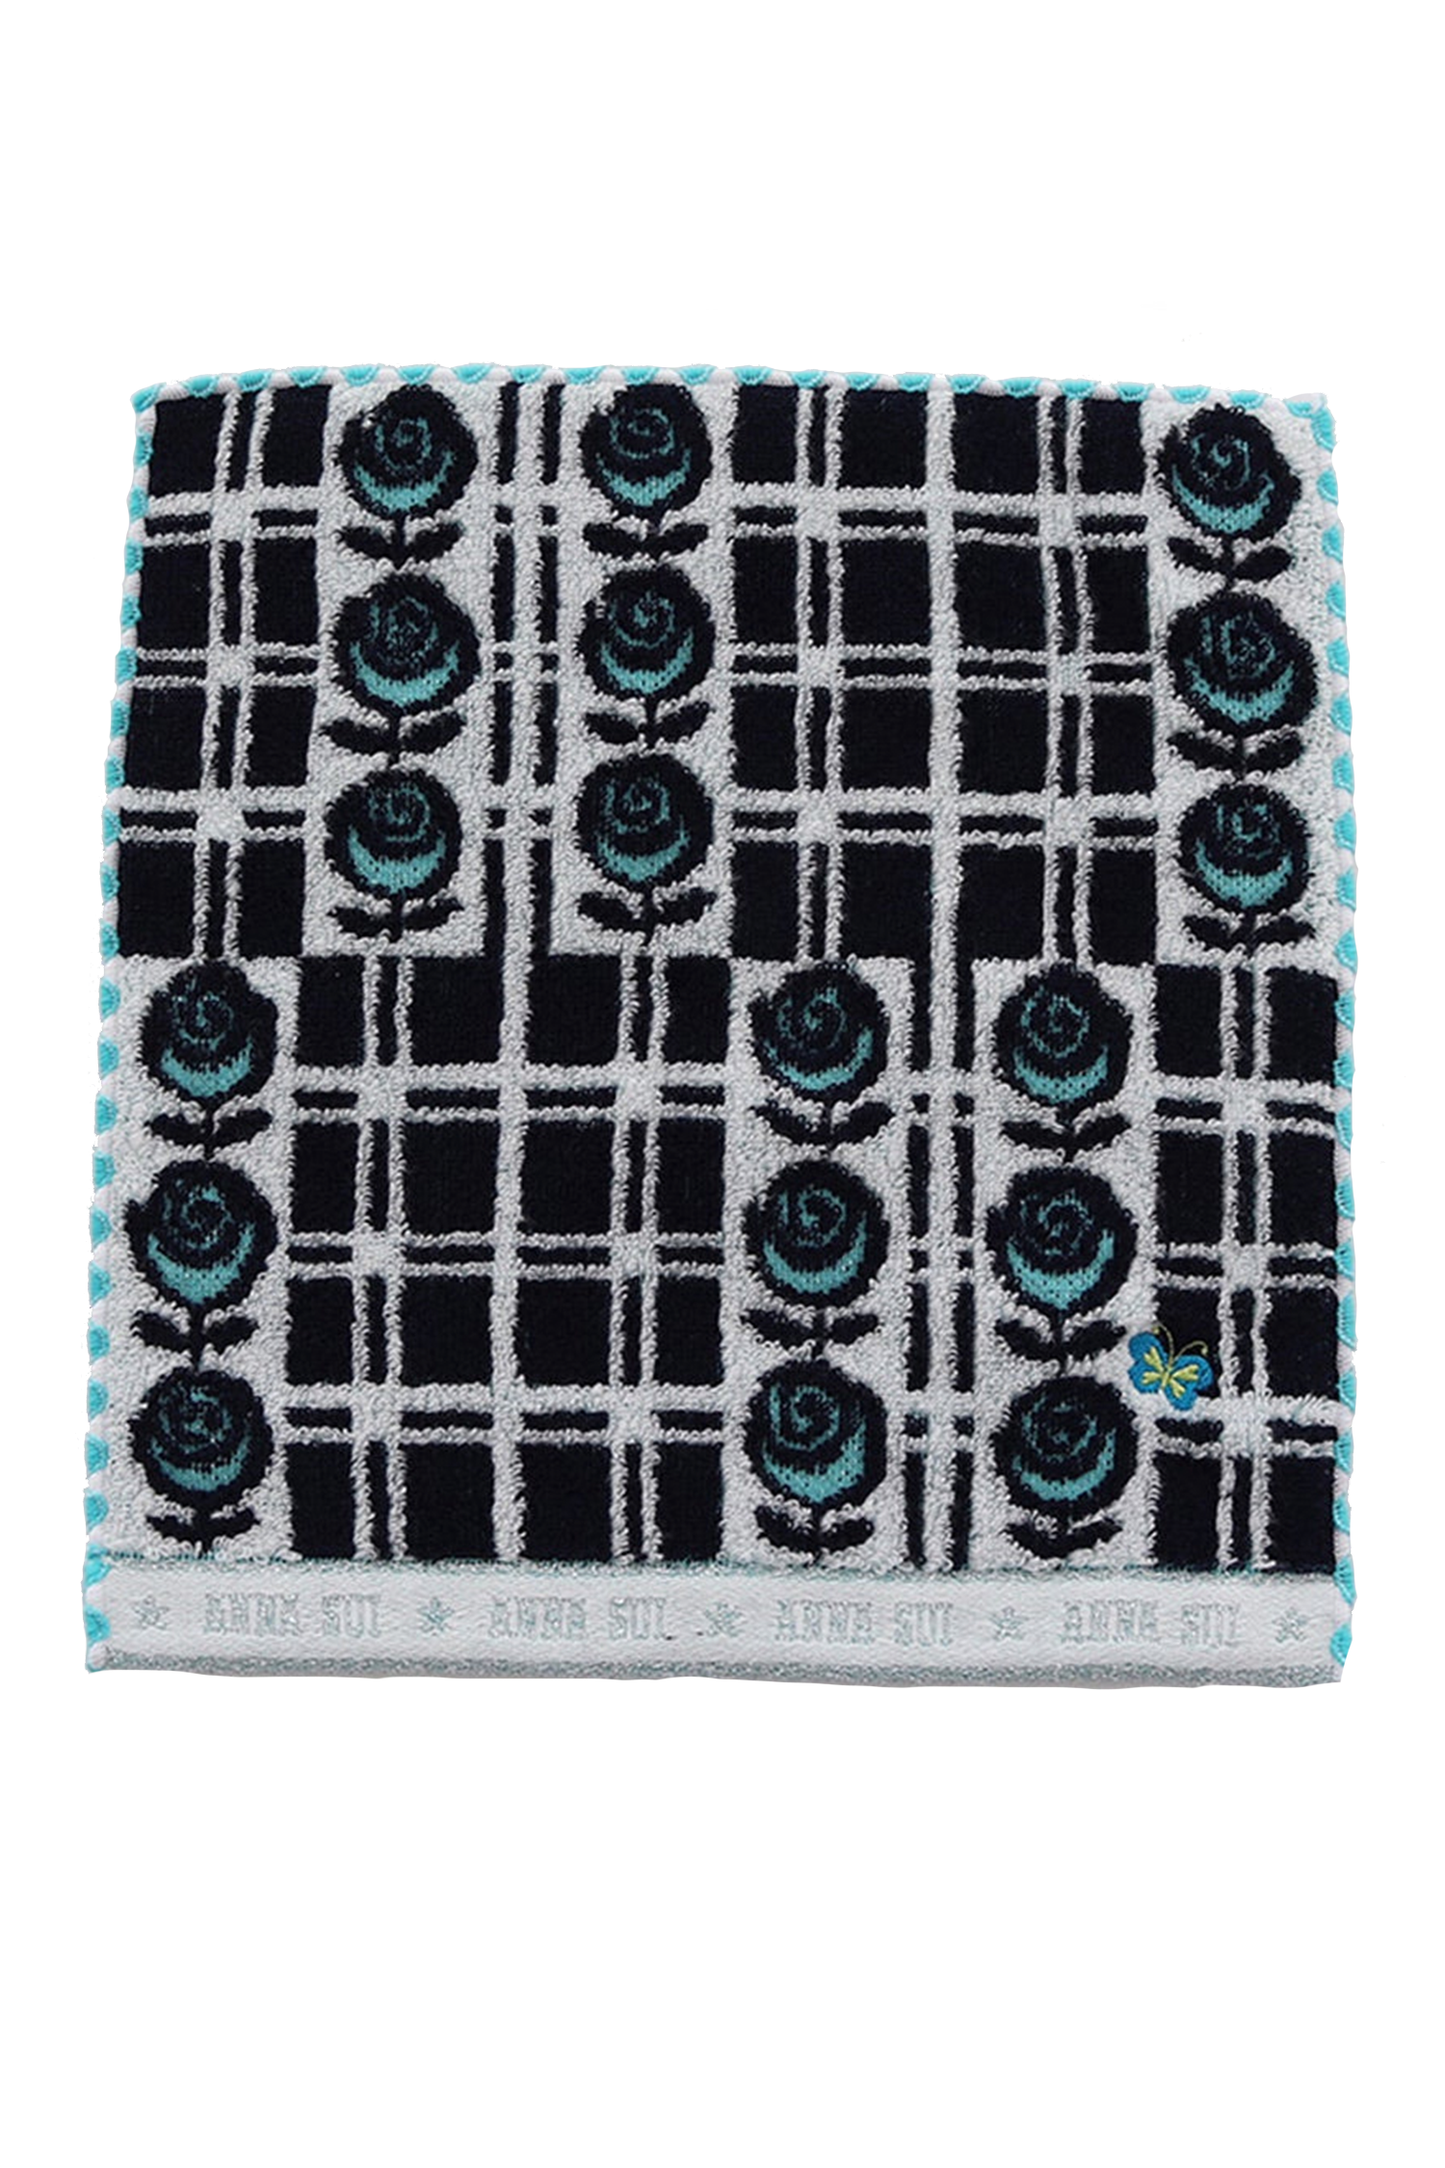 Washcloth, black with blue roses on white, white border at bottom with white Anna Sui's signature